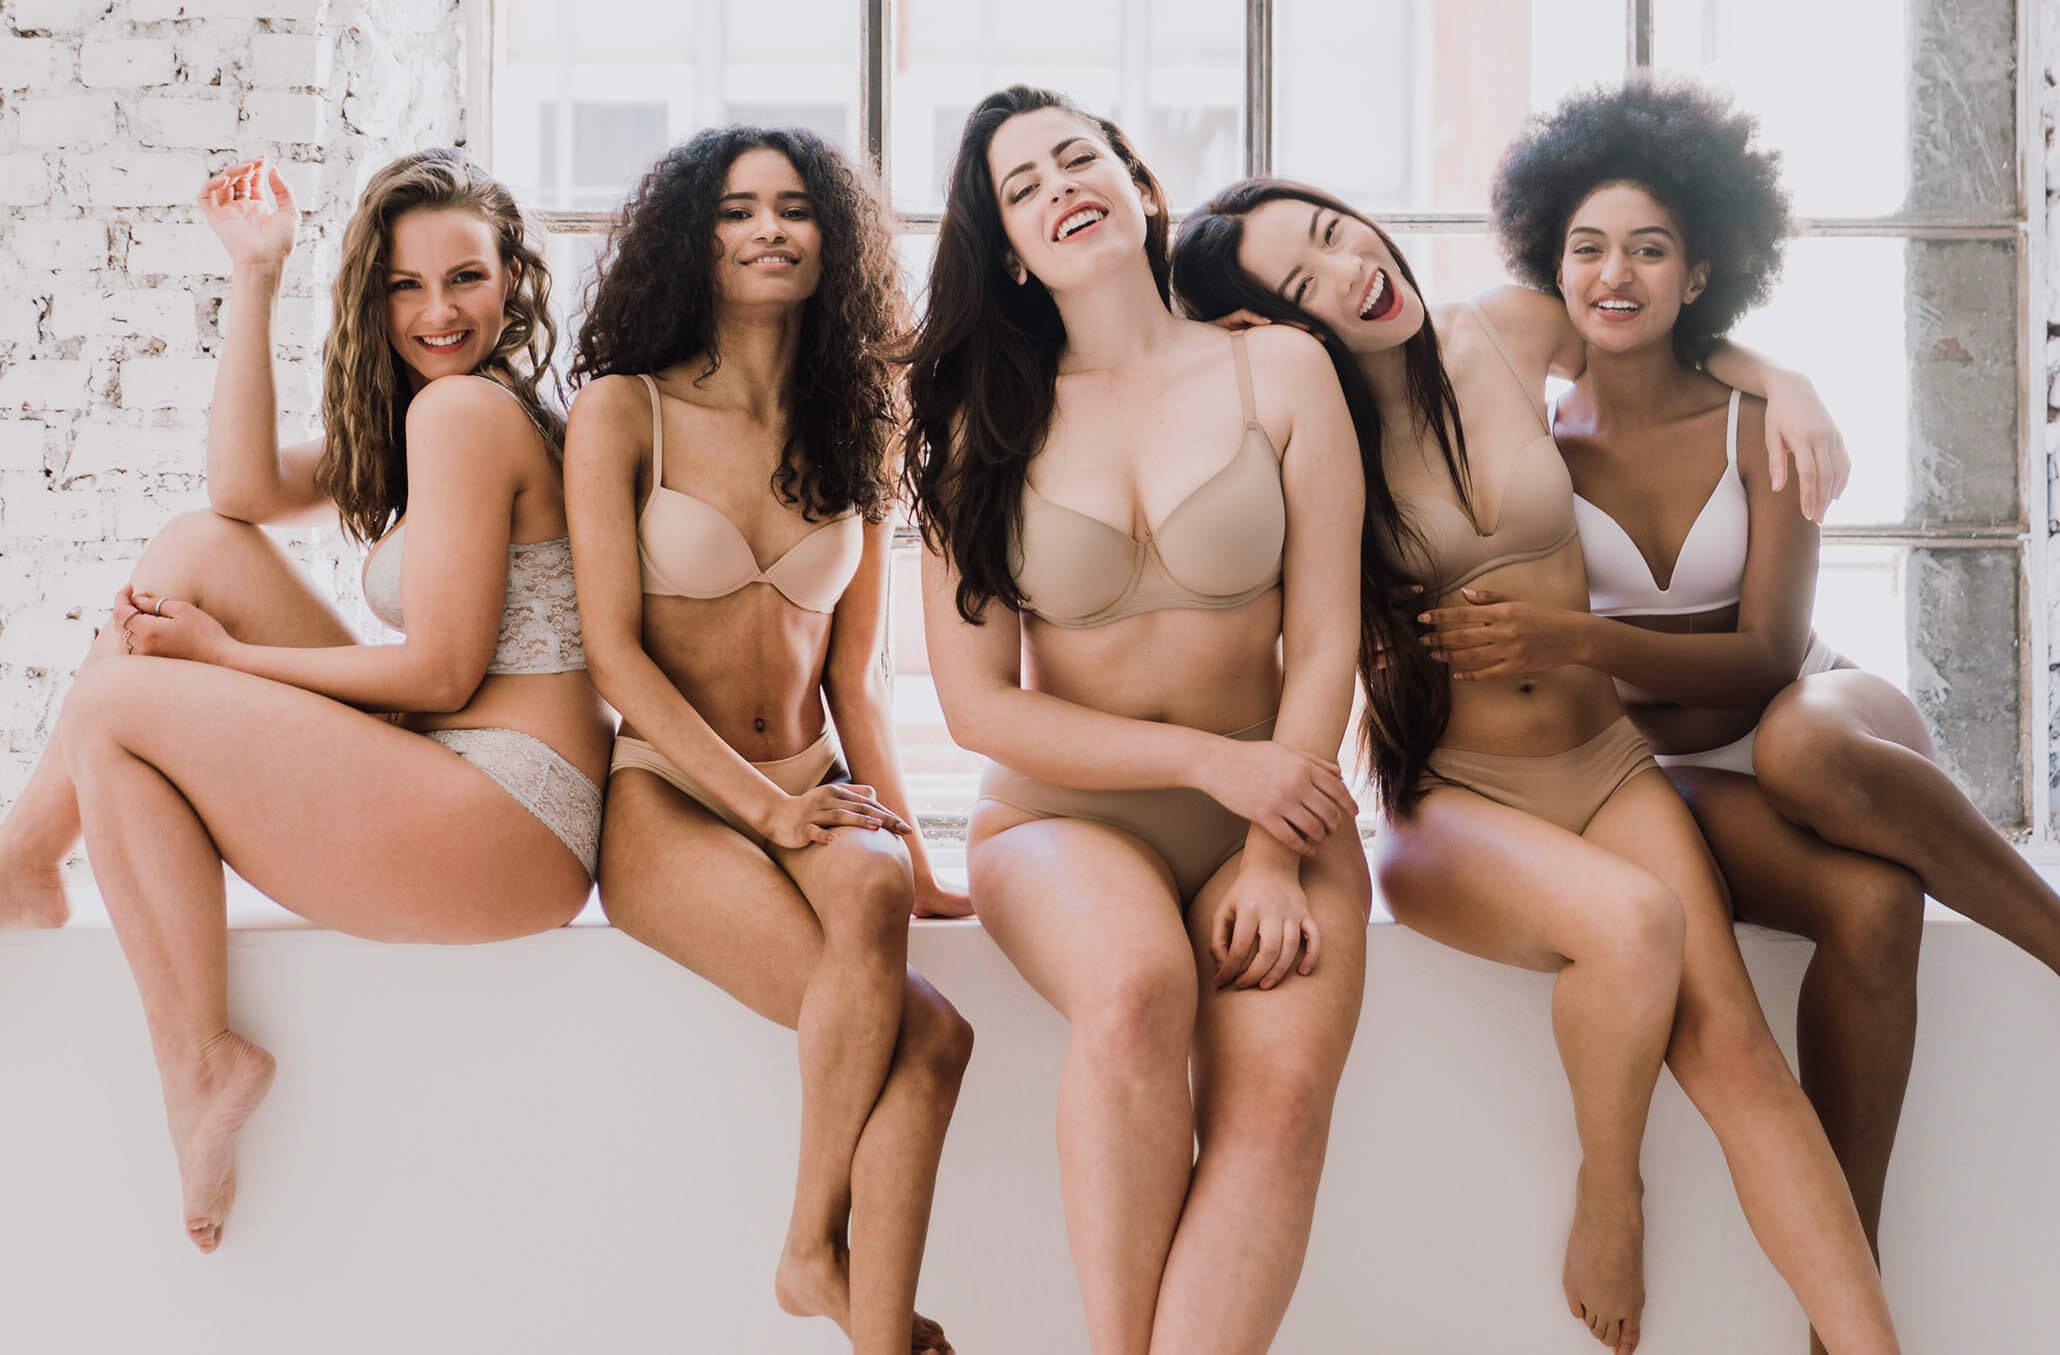 You can see stretch marks': Inside Everlane's unapologetic underwear ads -  The Washington Post